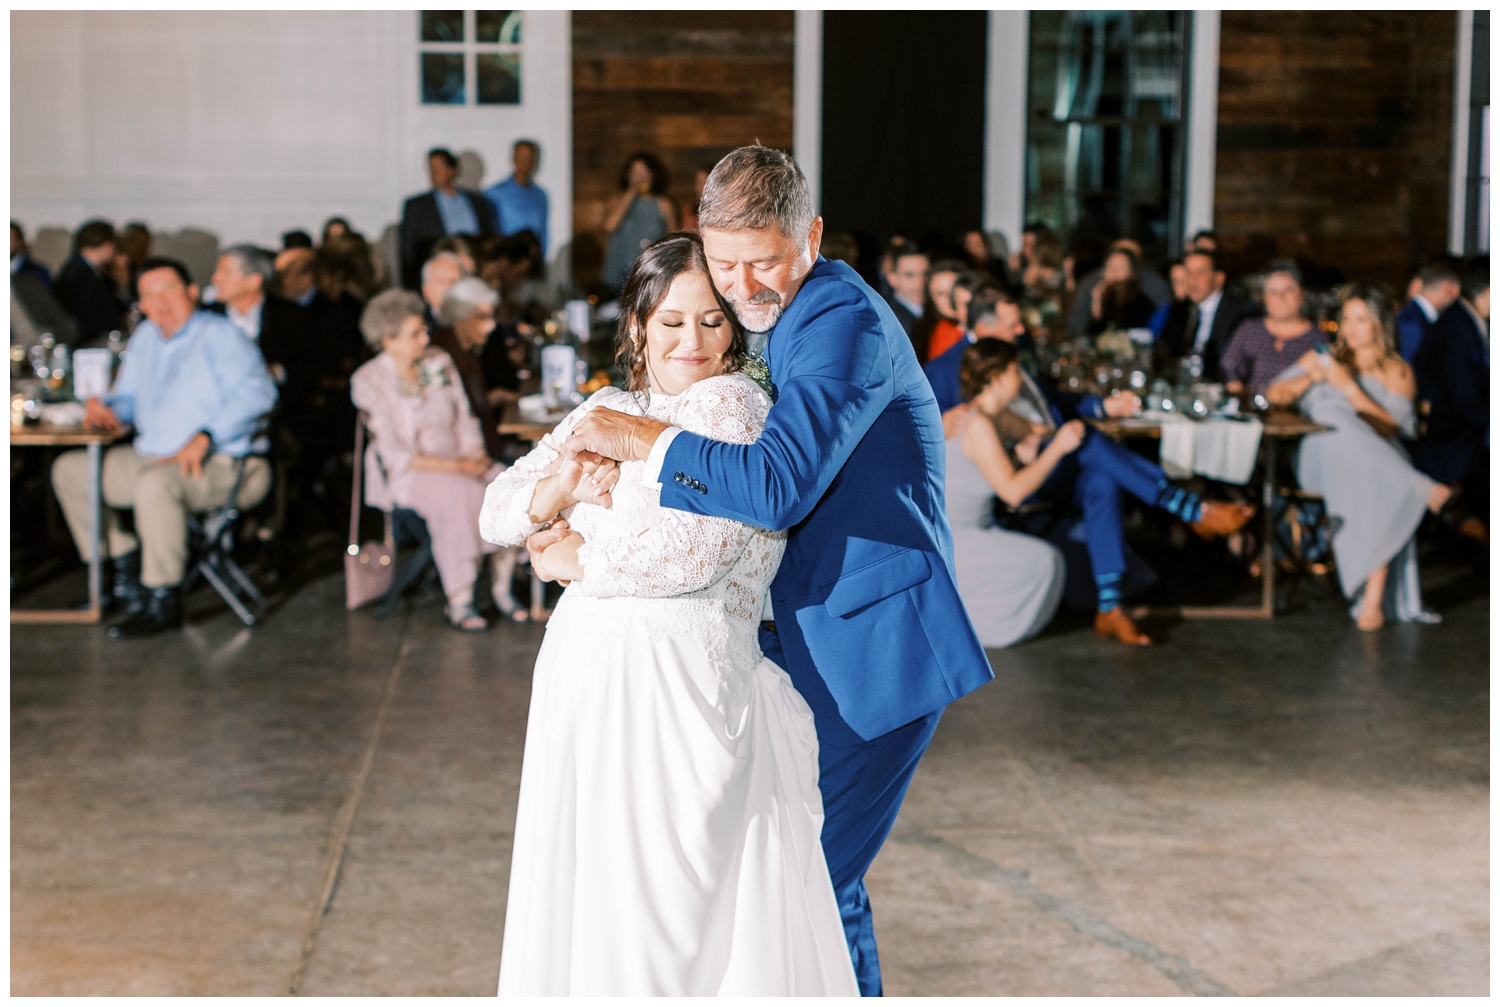 father daughter dancing at outdoor wedding reception